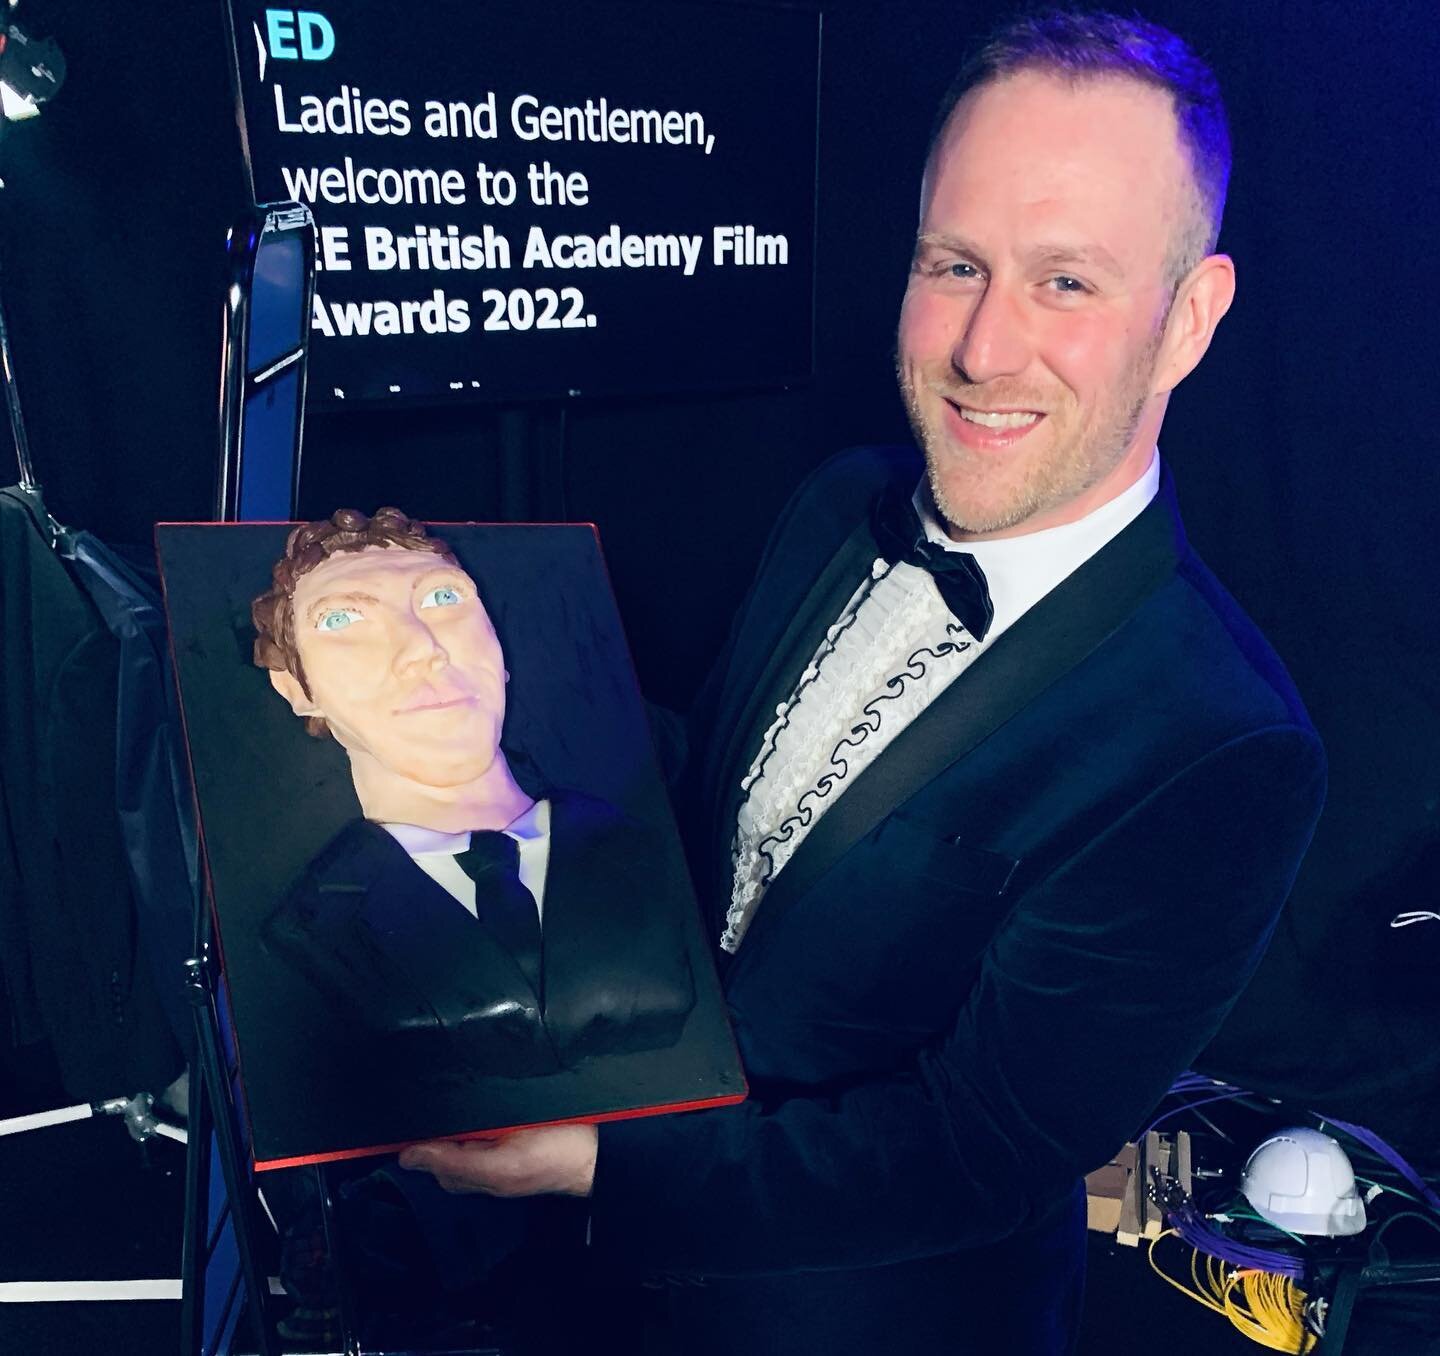 So proud to be asked to make a cake for @rebelwilson at the 75th annual @bafta awards! Entirely vegan for its recipient and muse, Benedict Cumberbatch! 💙
.
.
.
#bafta #cake #cakesofinstagram #cakedecorating #benedictcumberbatch #rebelwilson